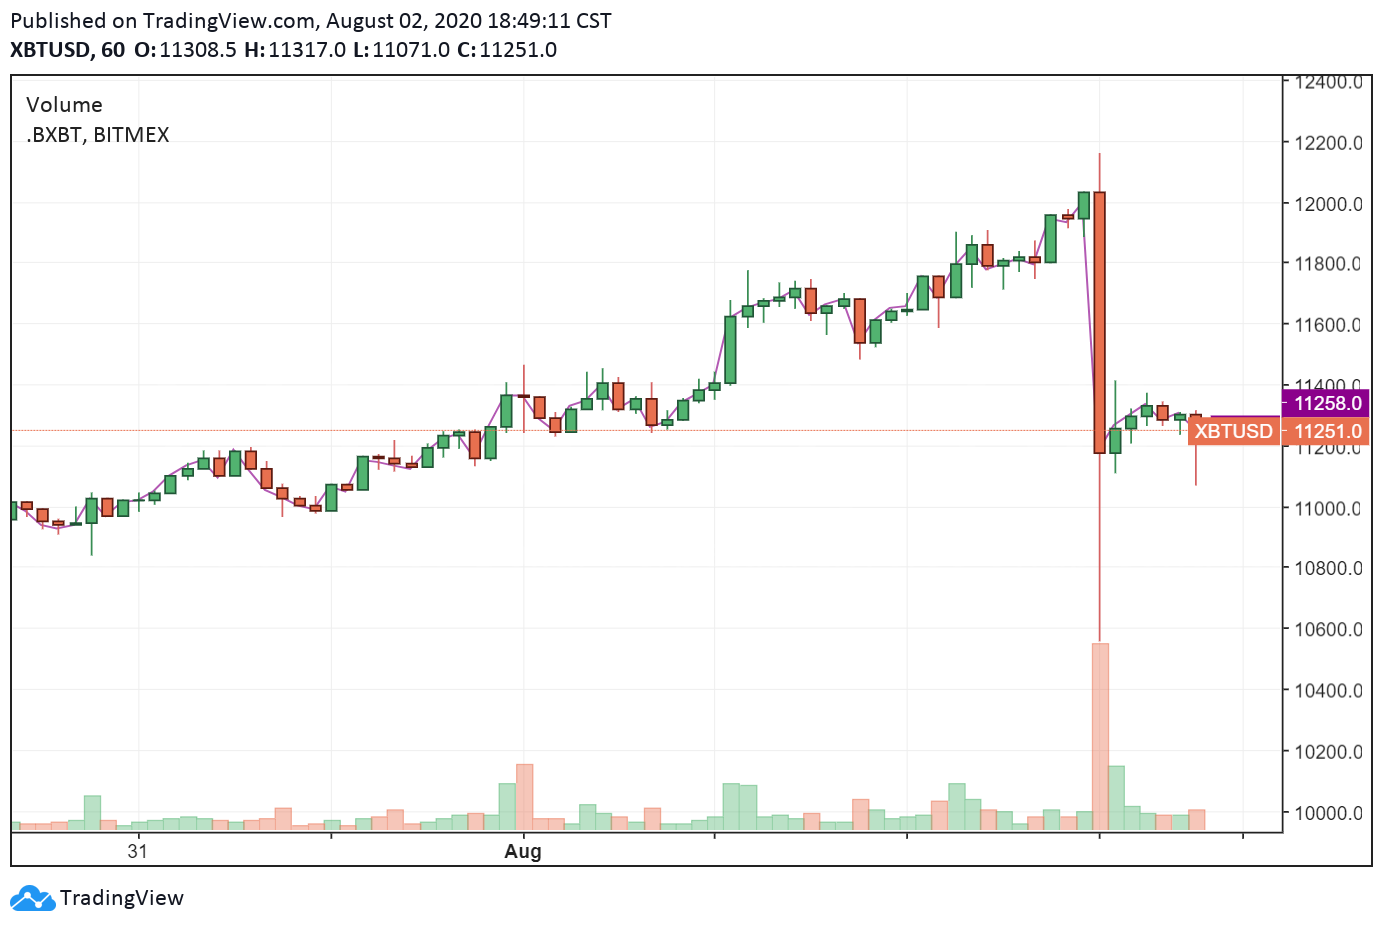 The price of Bitcoin sees a sharp drop in a short period